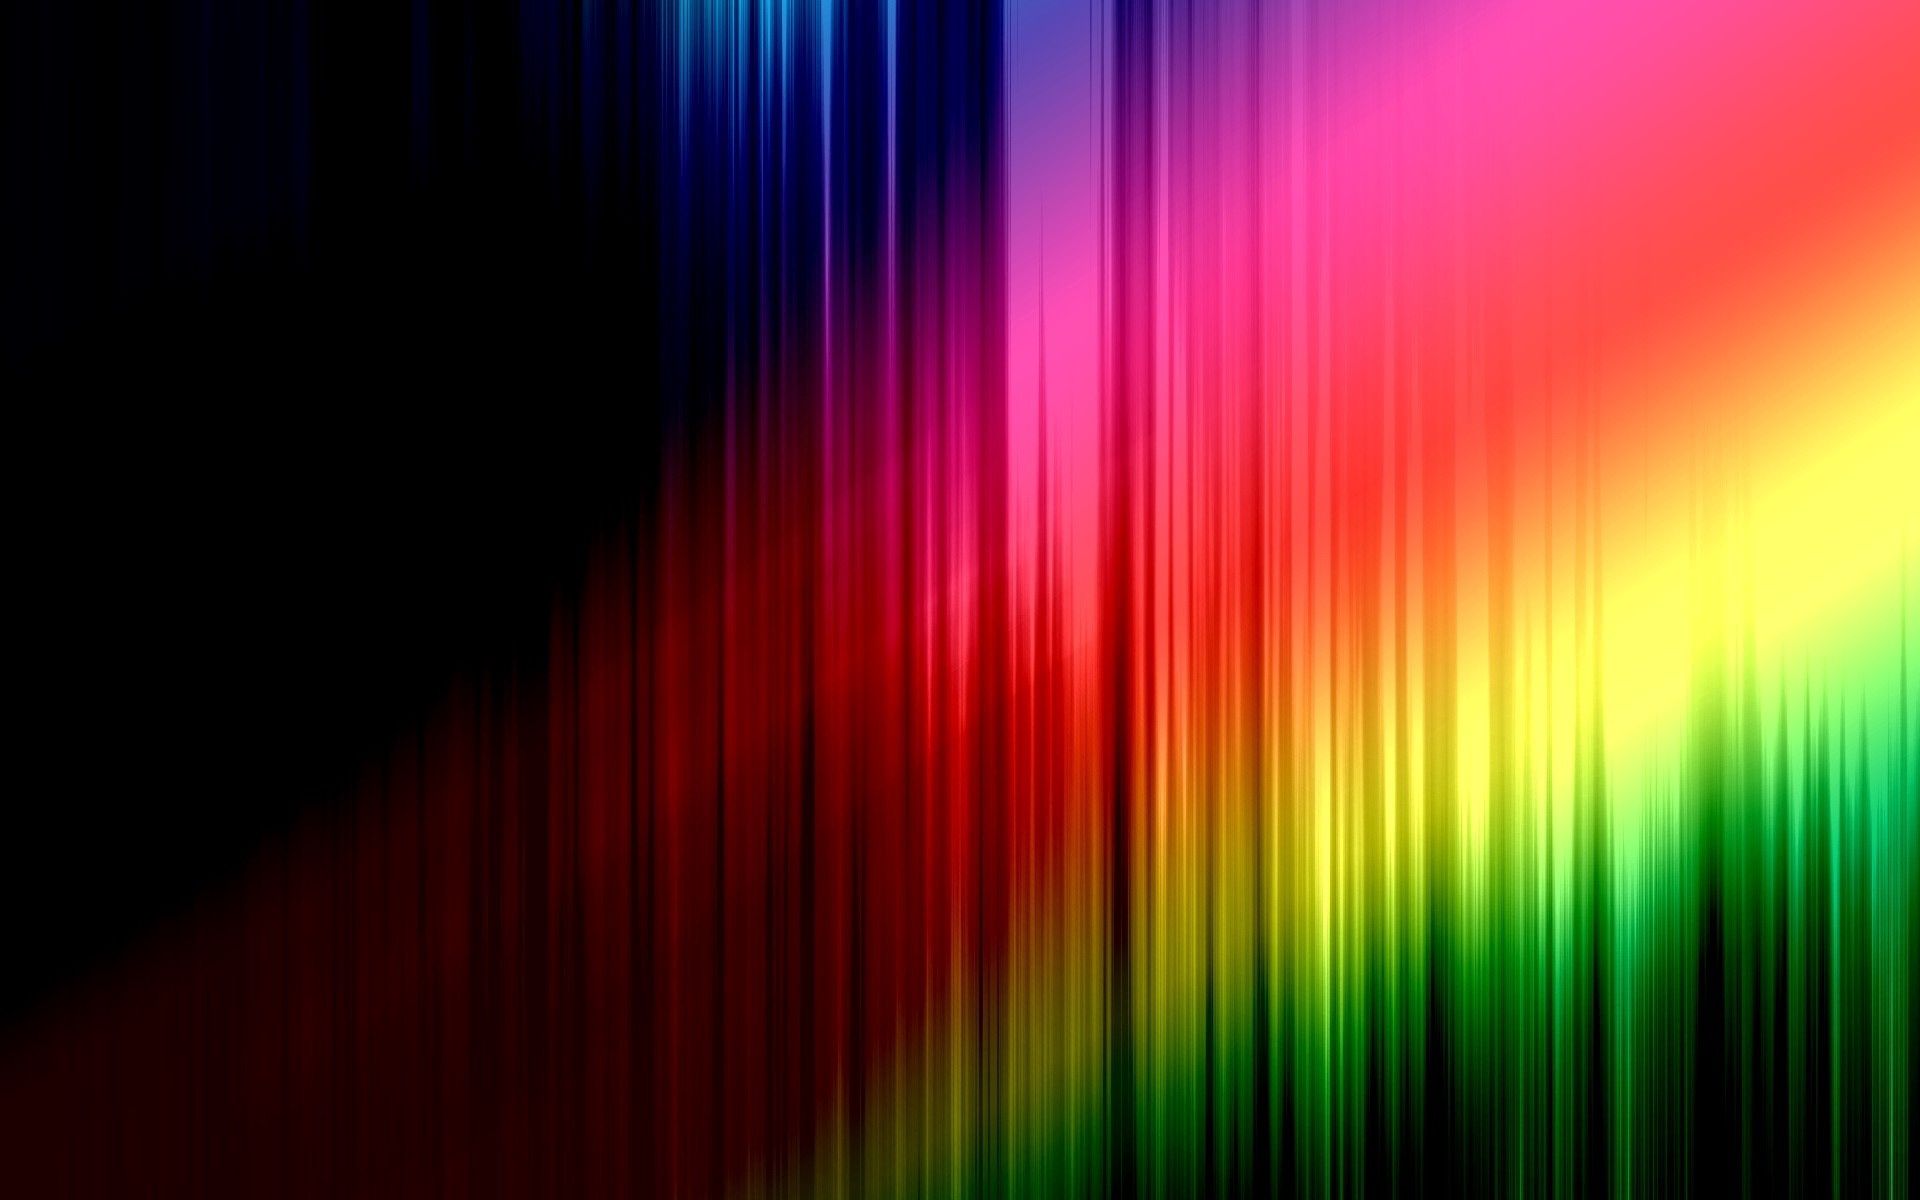 86589 download wallpaper abstract, rainbow, lines, stripes, streaks, iridescent, vertical screensavers and pictures for free